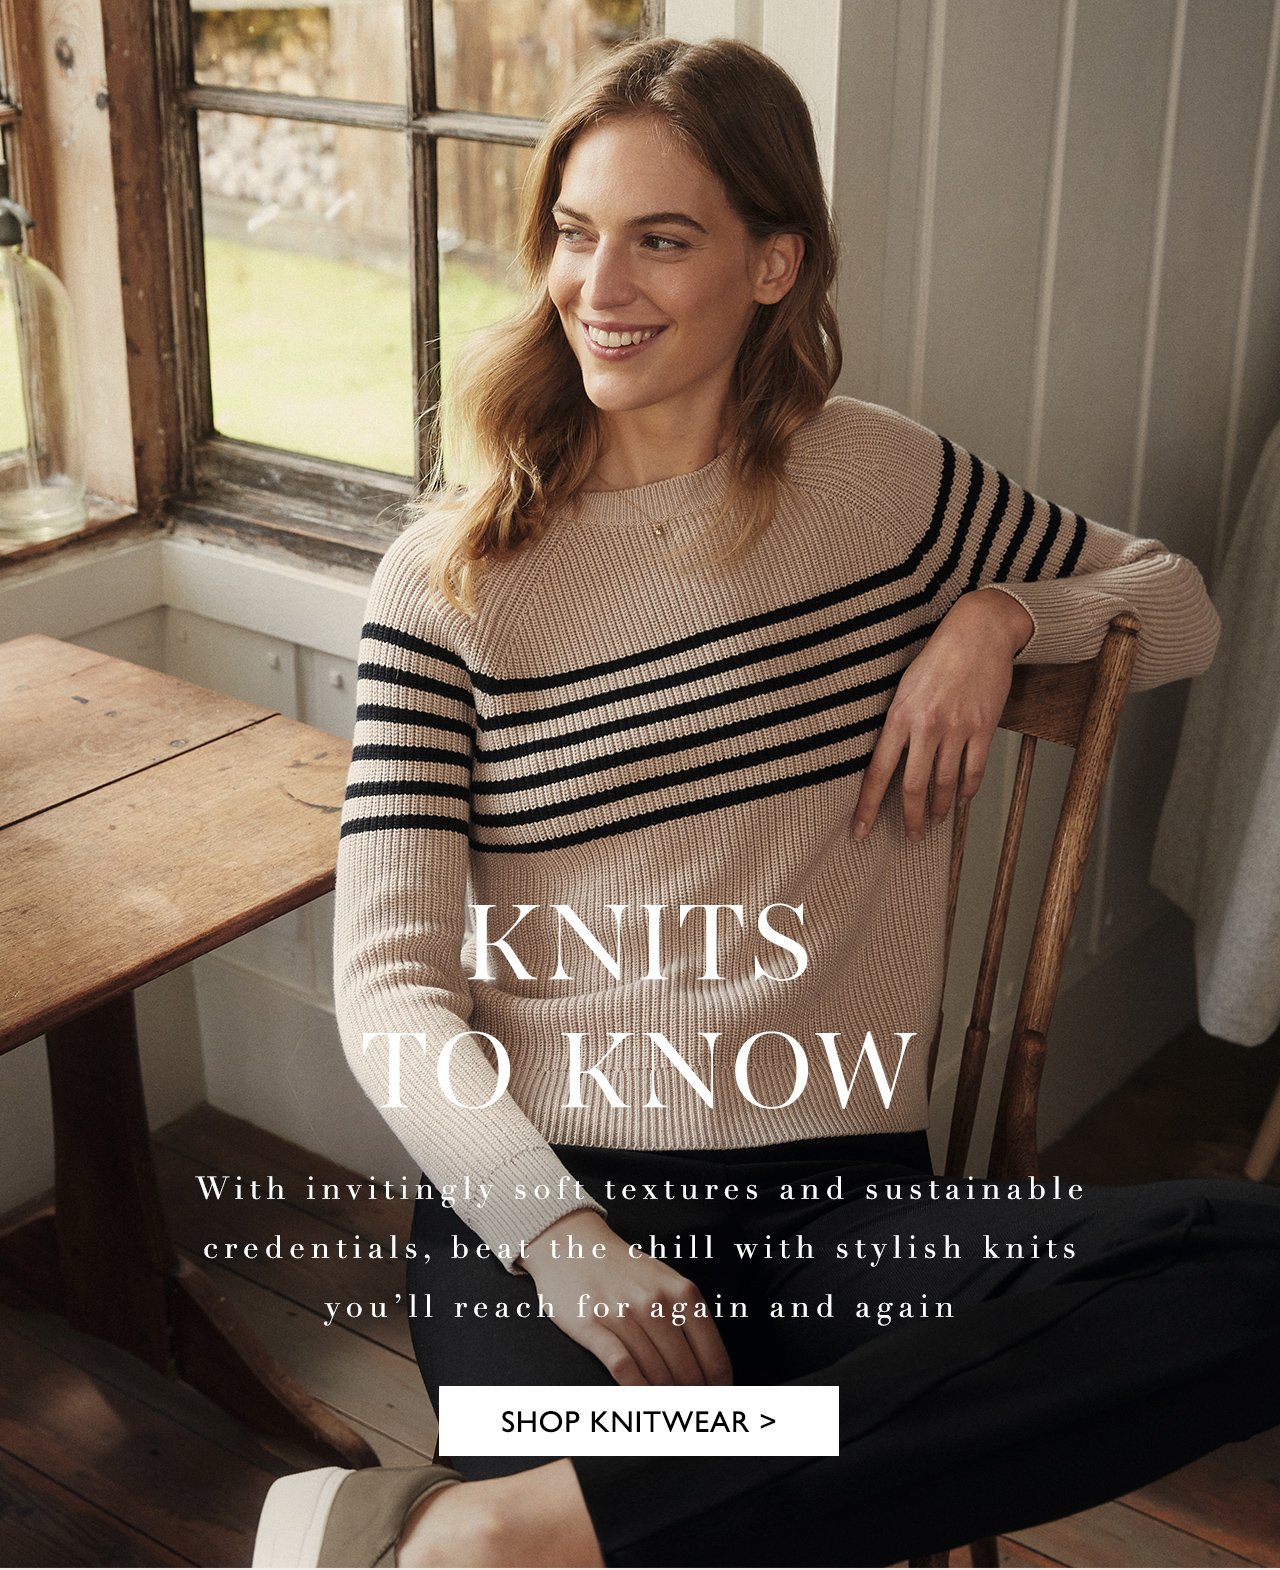 KNITS TO KNOW | SHOP KNITWEAR